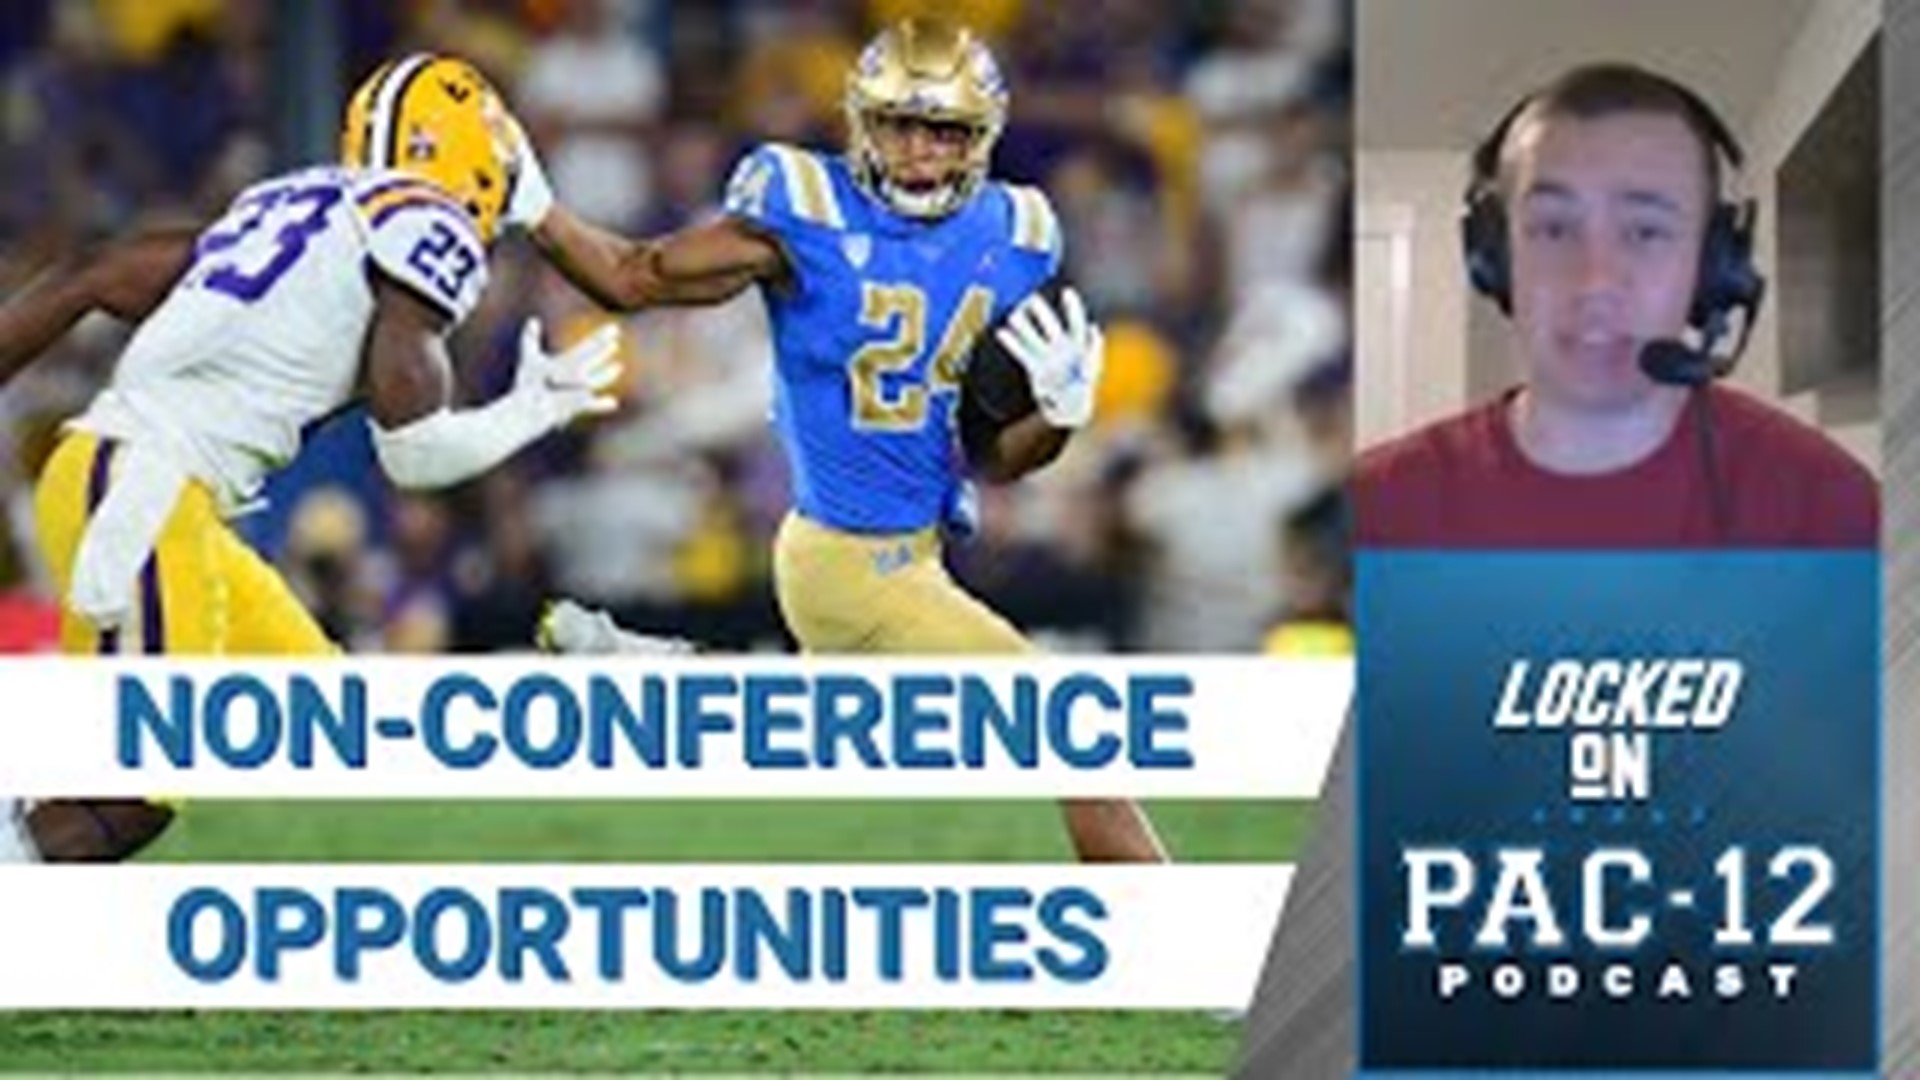 Several Pac-12 teams have non-conference games on their schedule that are great opportunities to try and re-establish their brand on a national level.